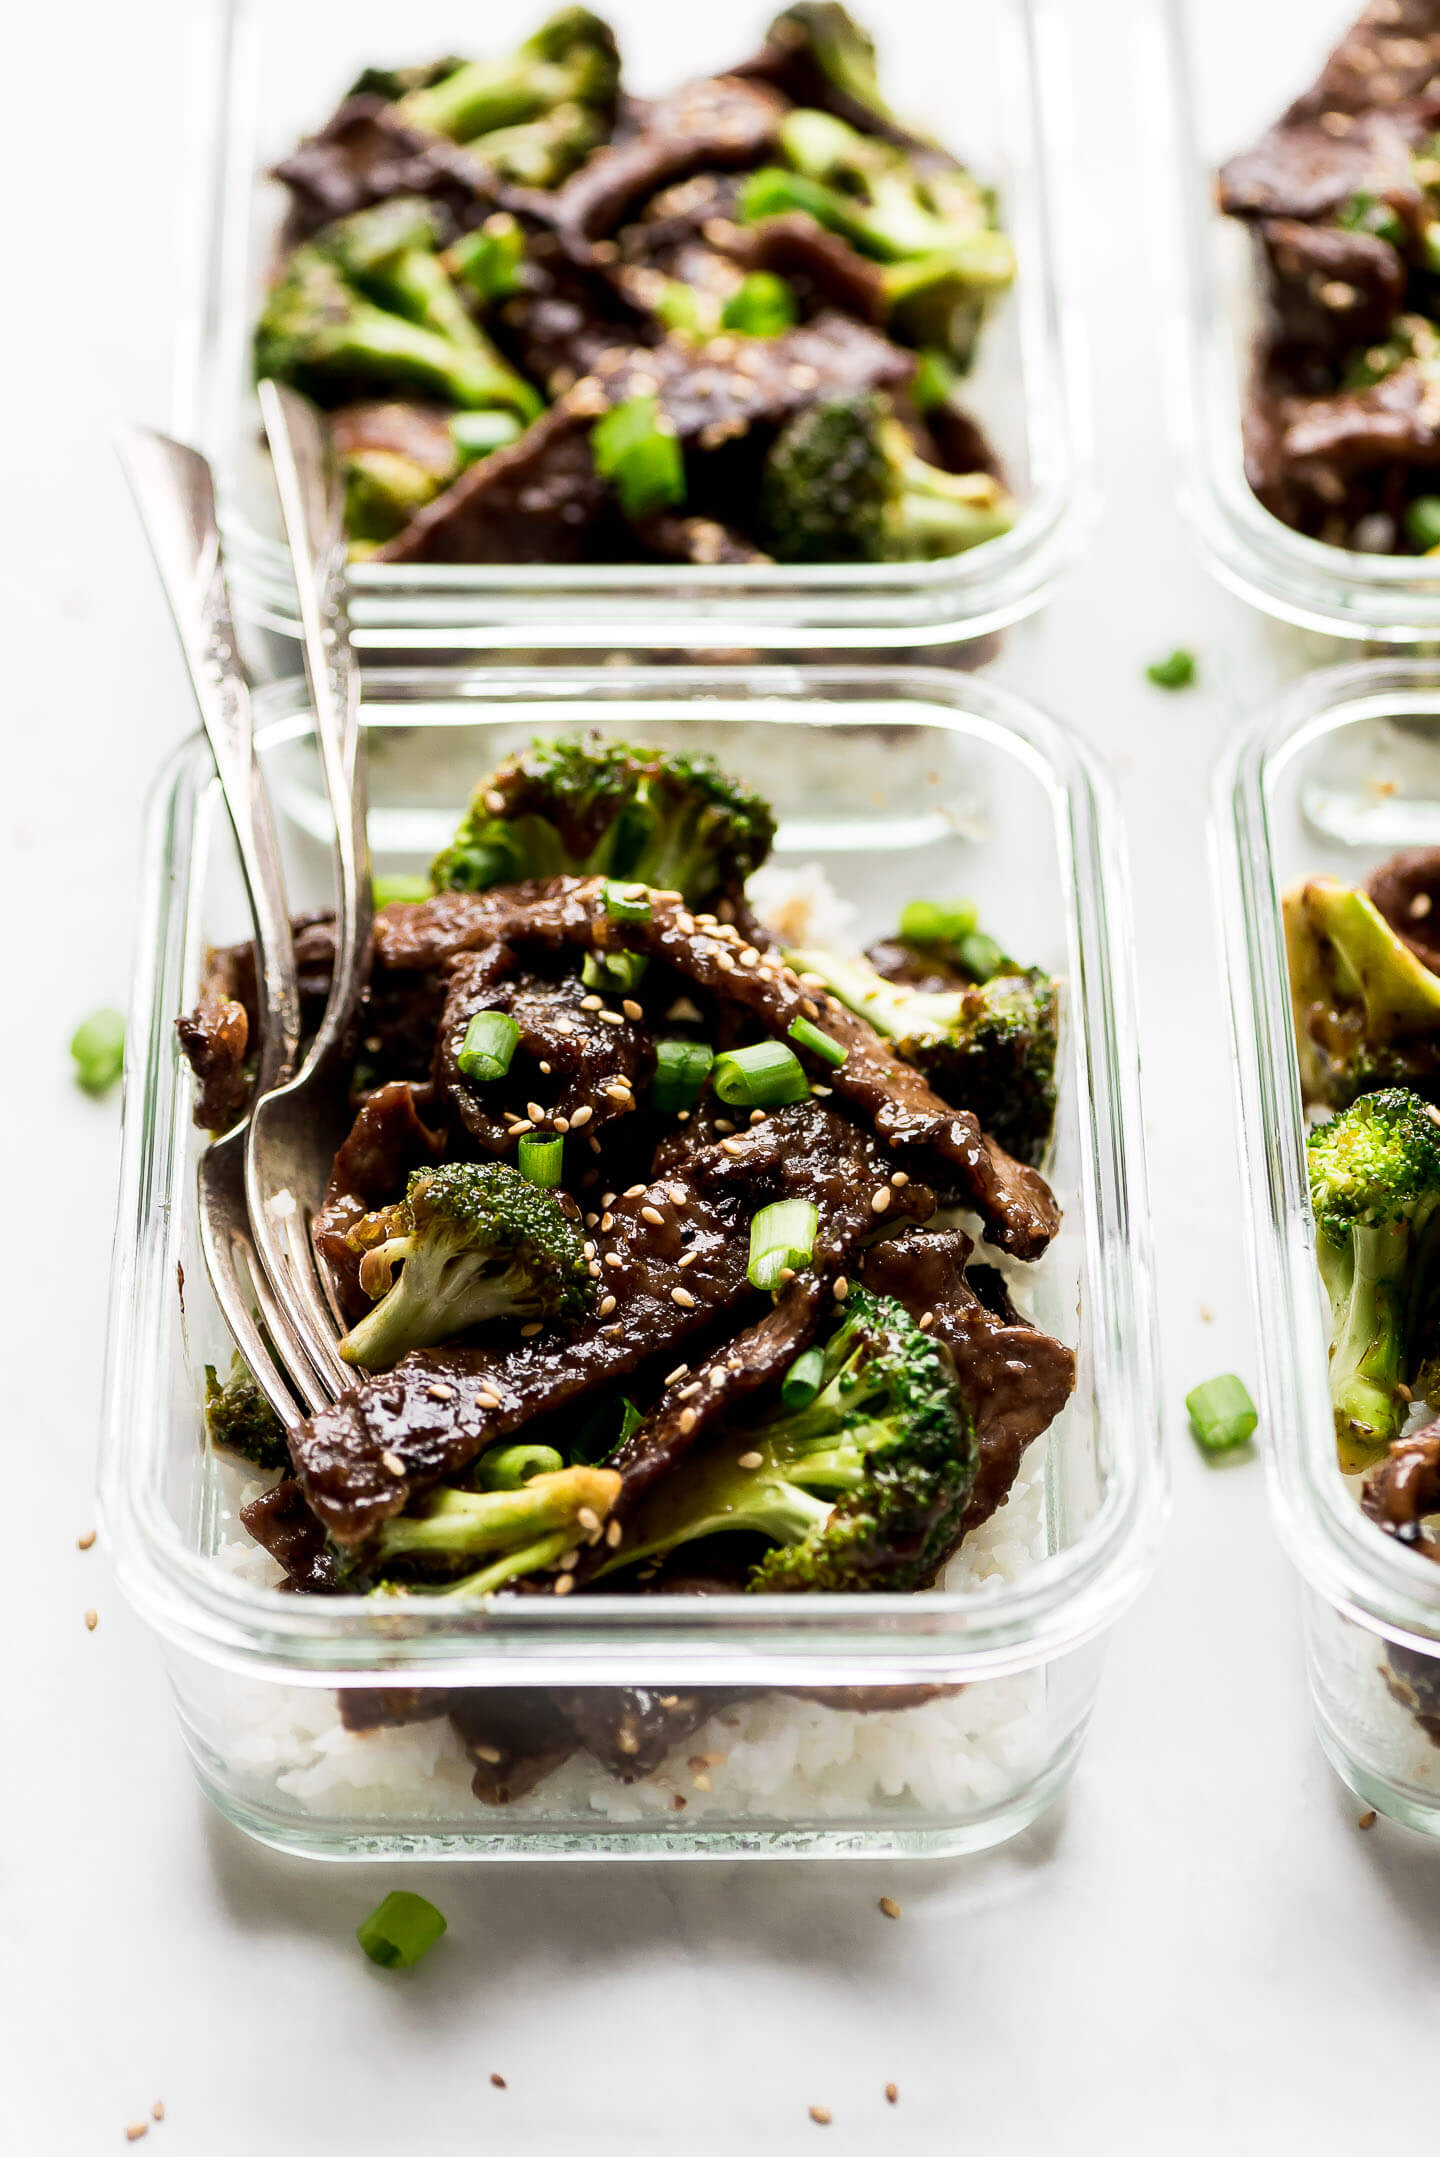 A close up photo of Beef and Broccoli Stir Fry in a meal prep container.